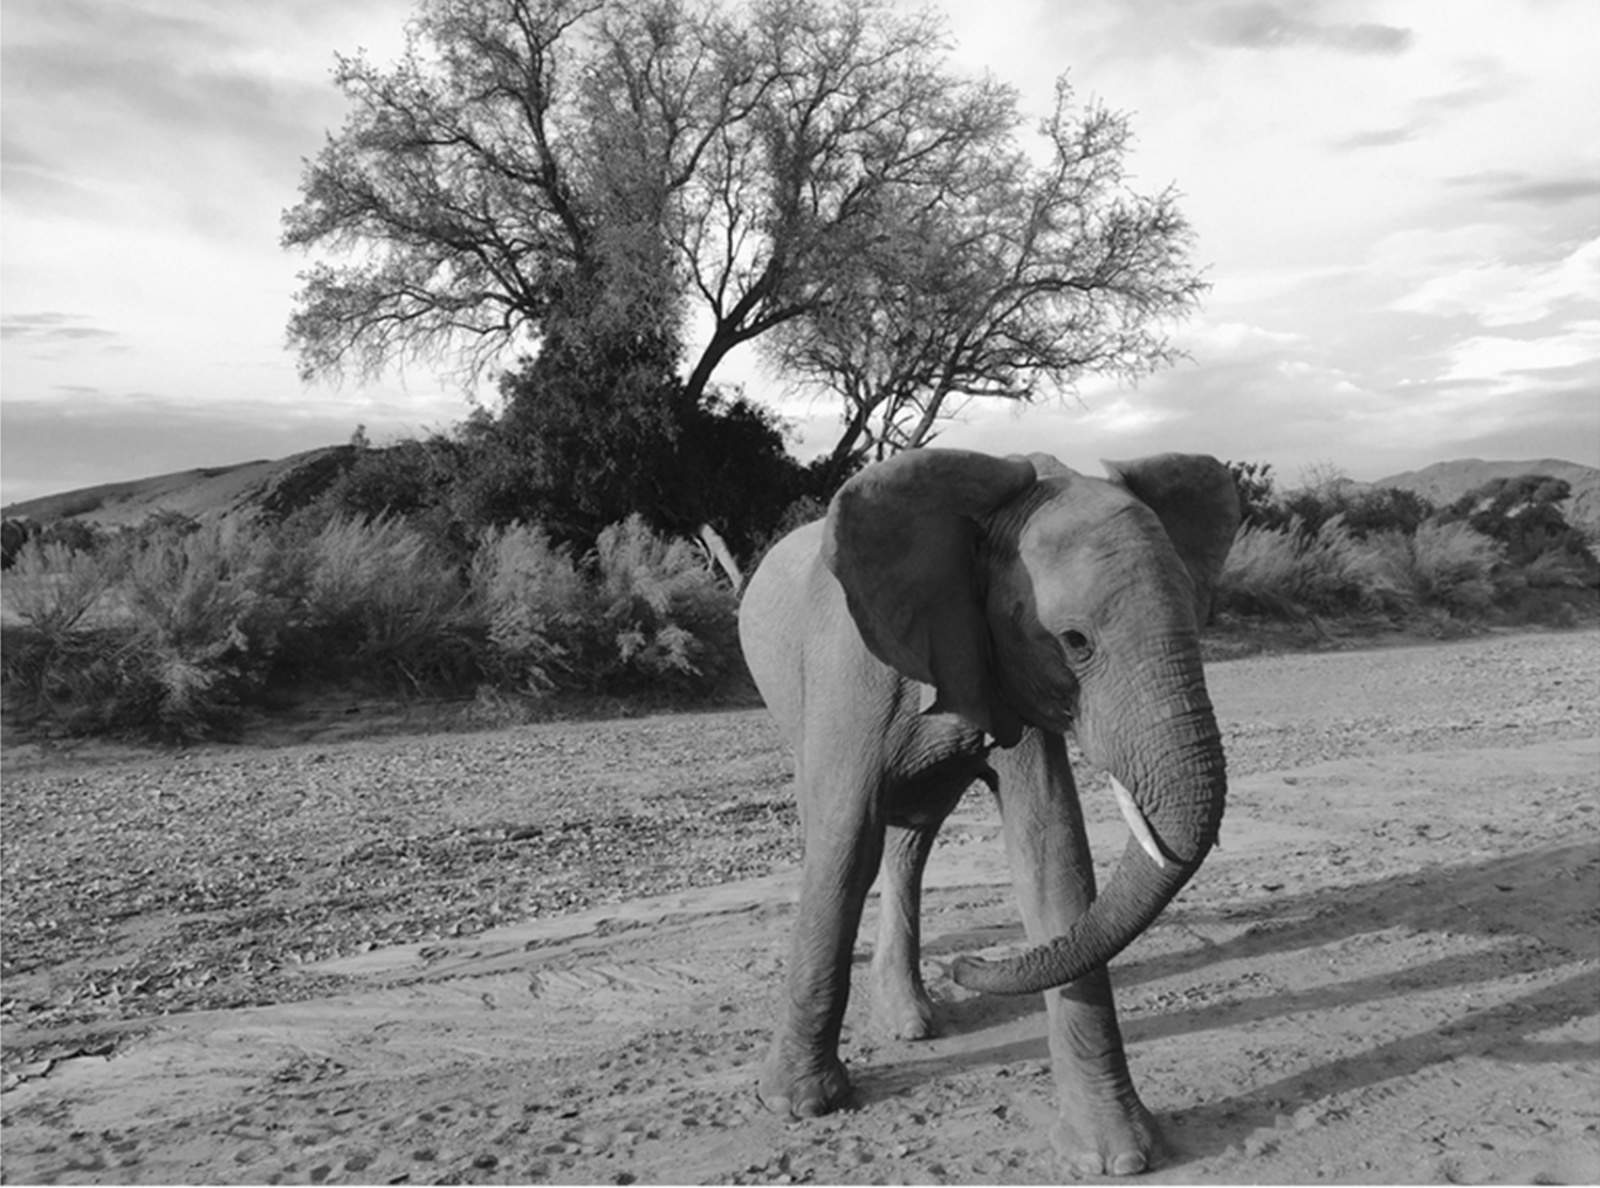 Jen Pollack Bianco captured this juvenile elephant charging her safari vehicle on the iPhone 6.